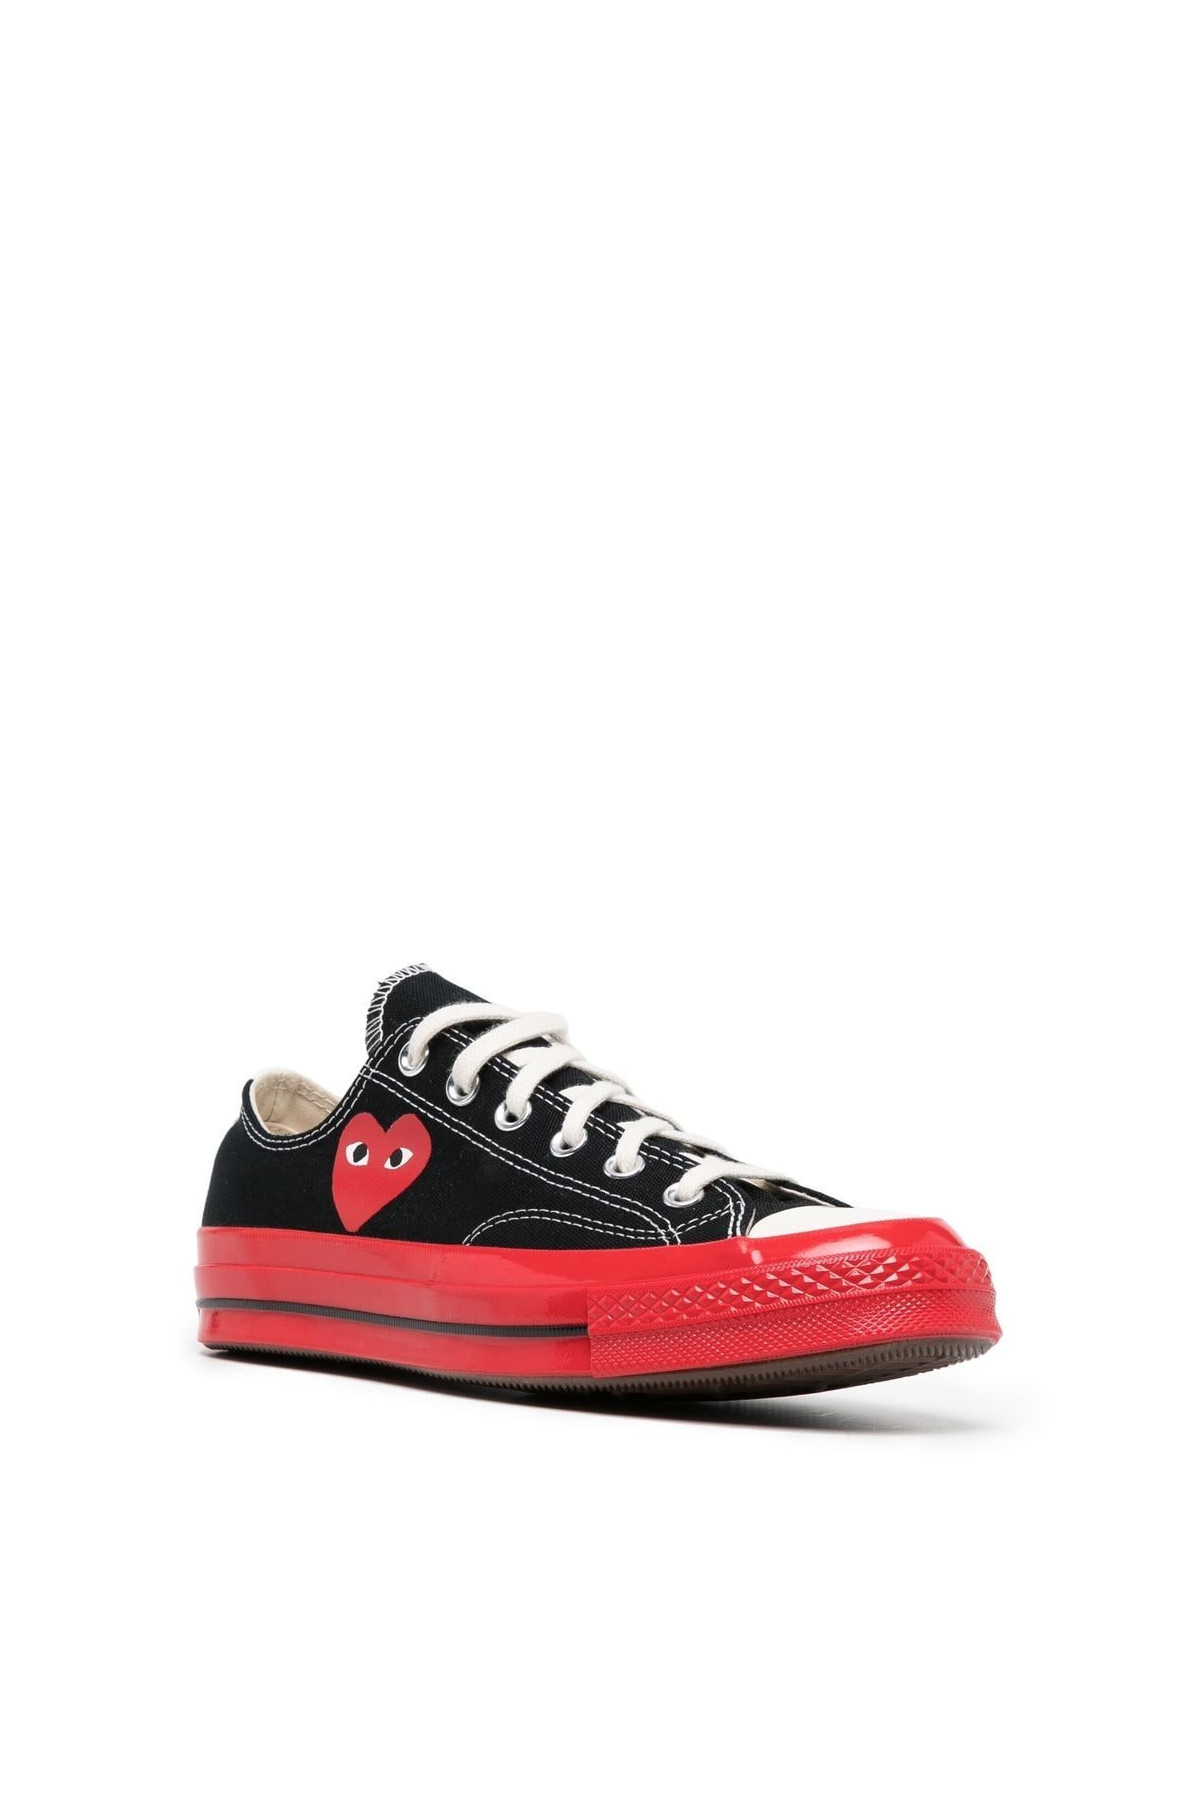 Play Converse Chuck Taylor Low Red Sole P1K123